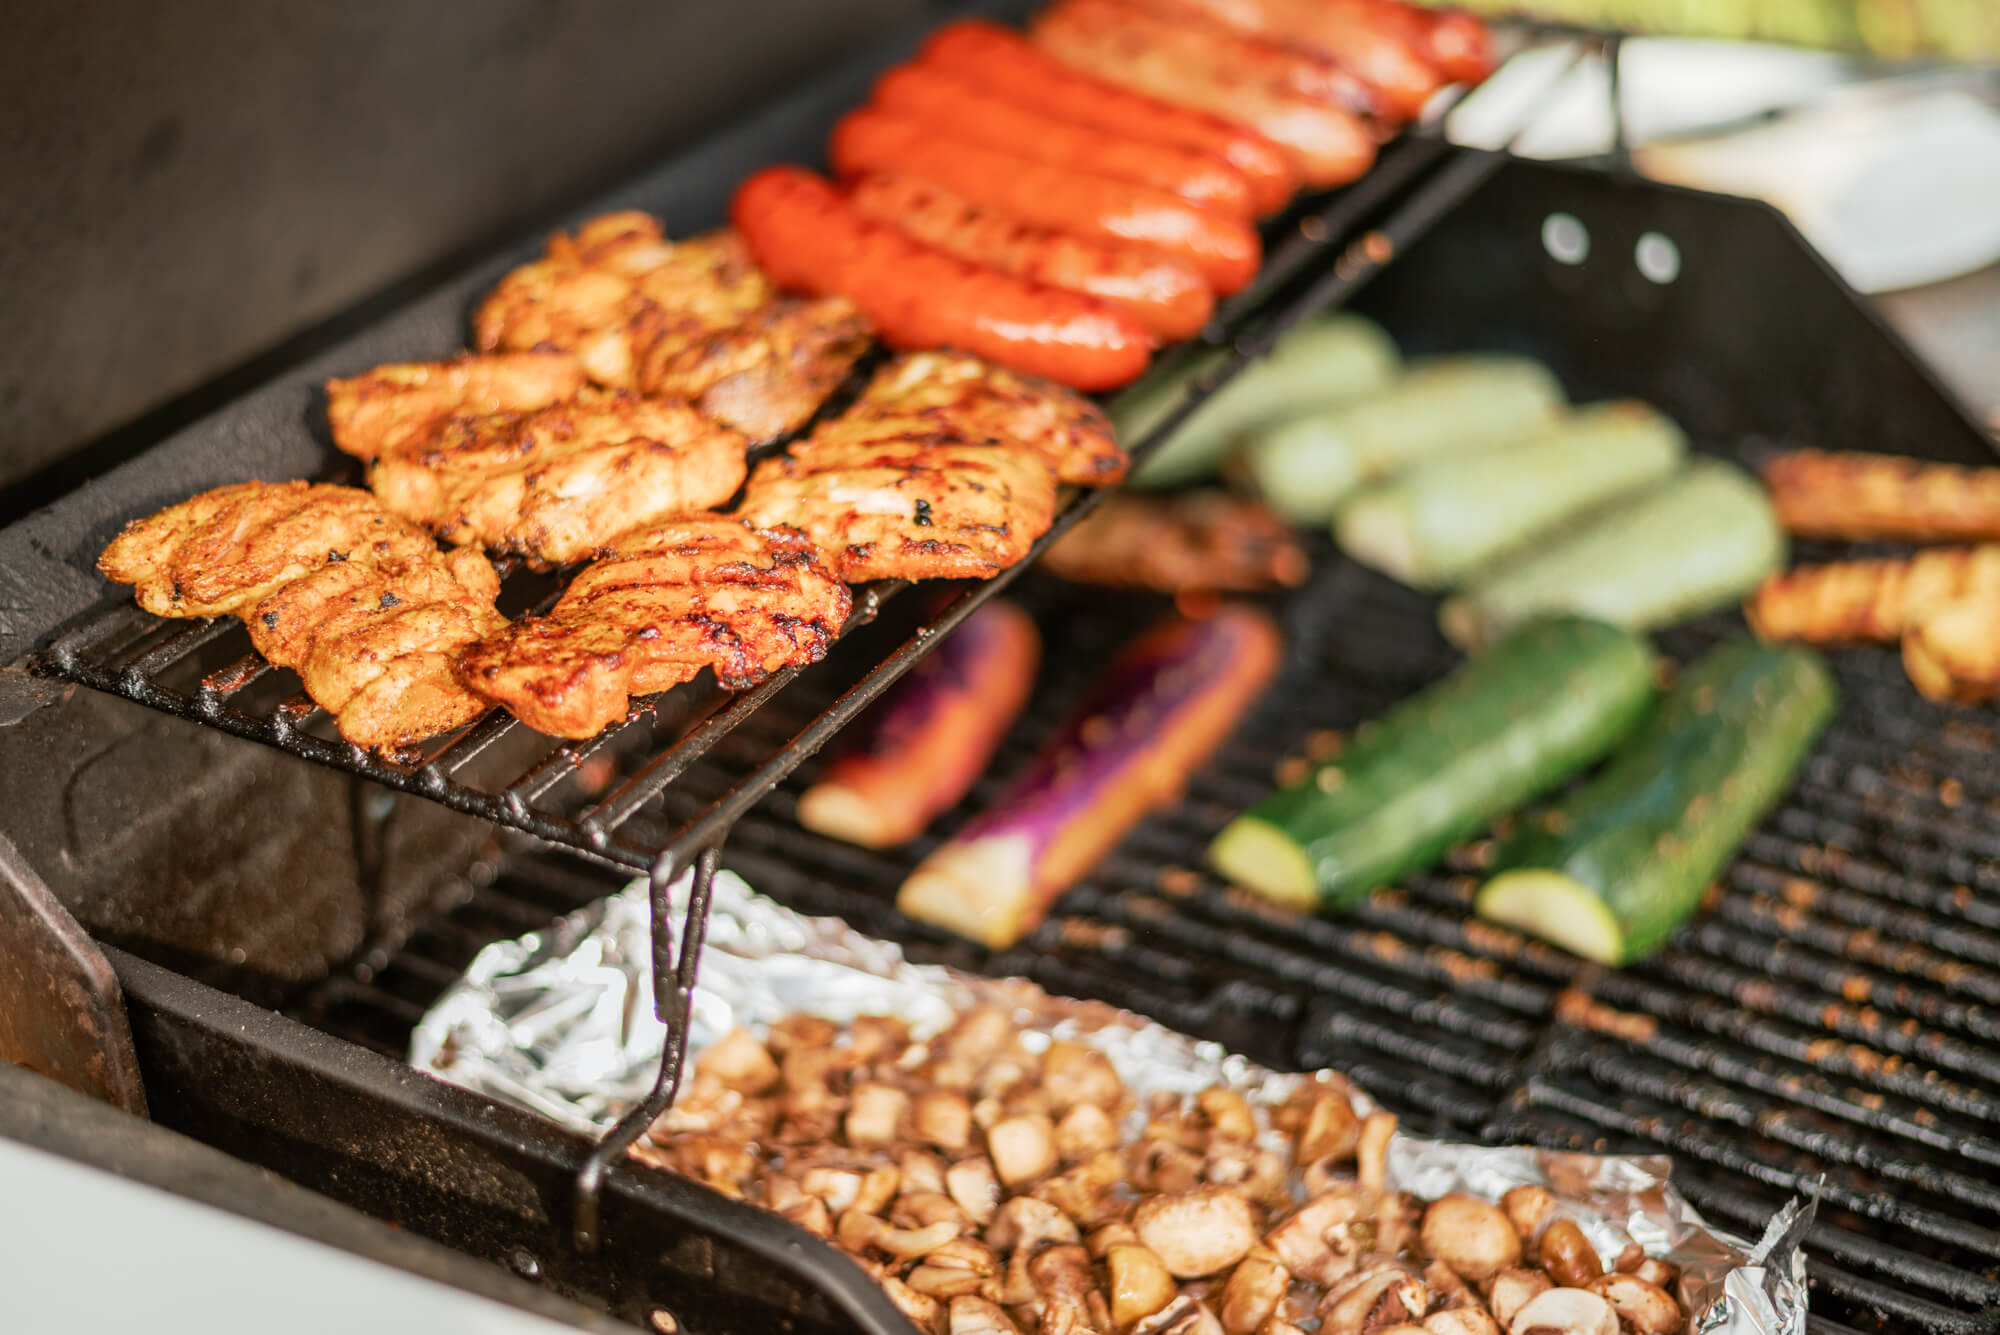 Chicken, sausages, and vegetables sit on the grill.